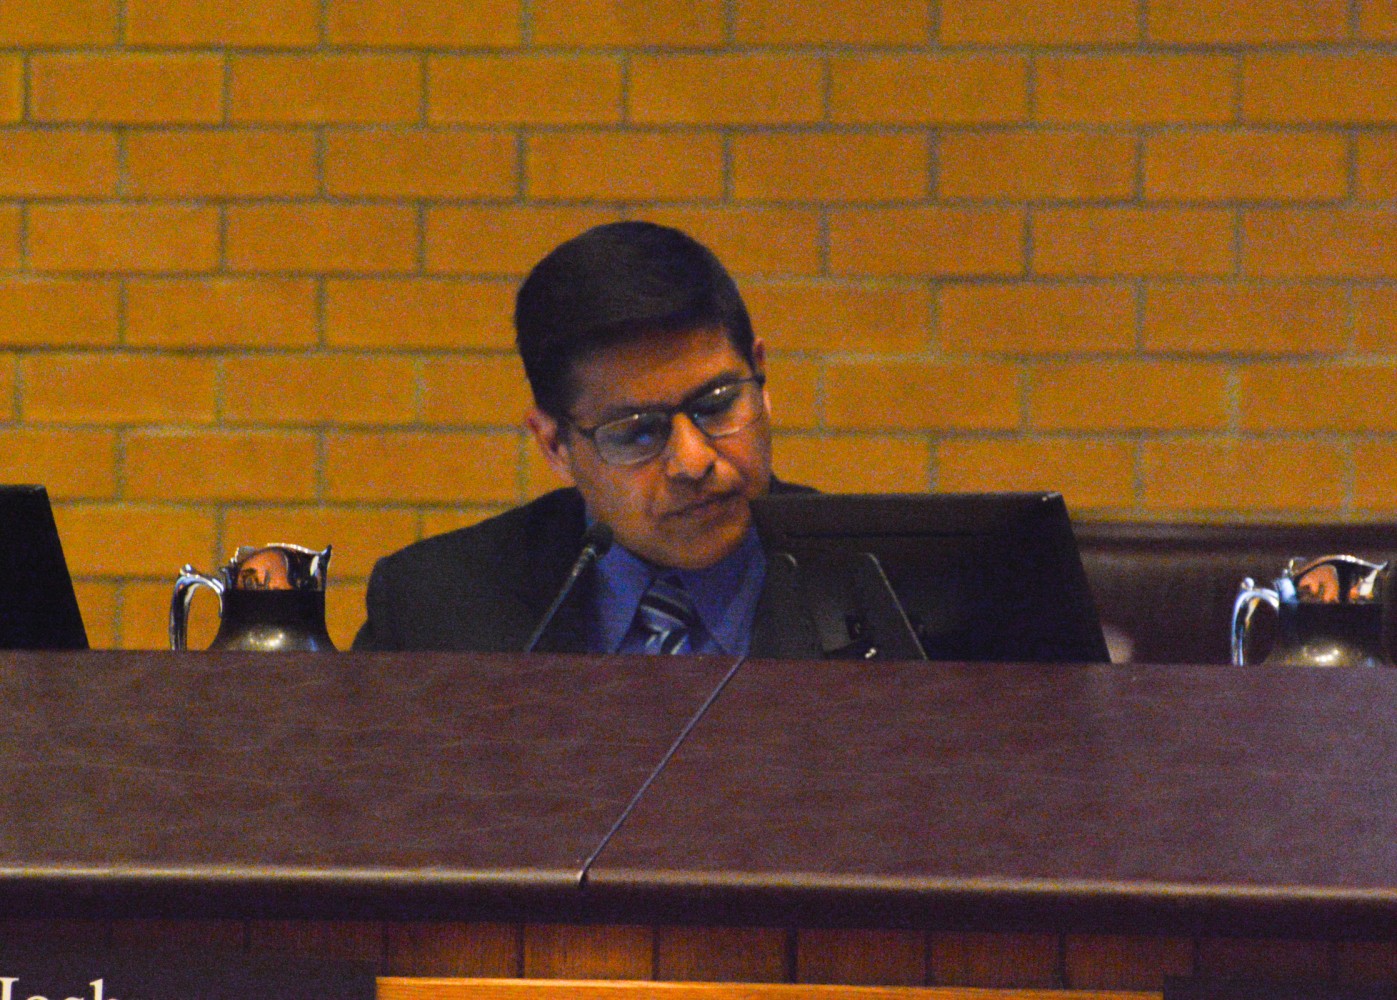 A ‘shameful’ lack of action; Council of Canadian Muslims demands PDSB chair and director resign